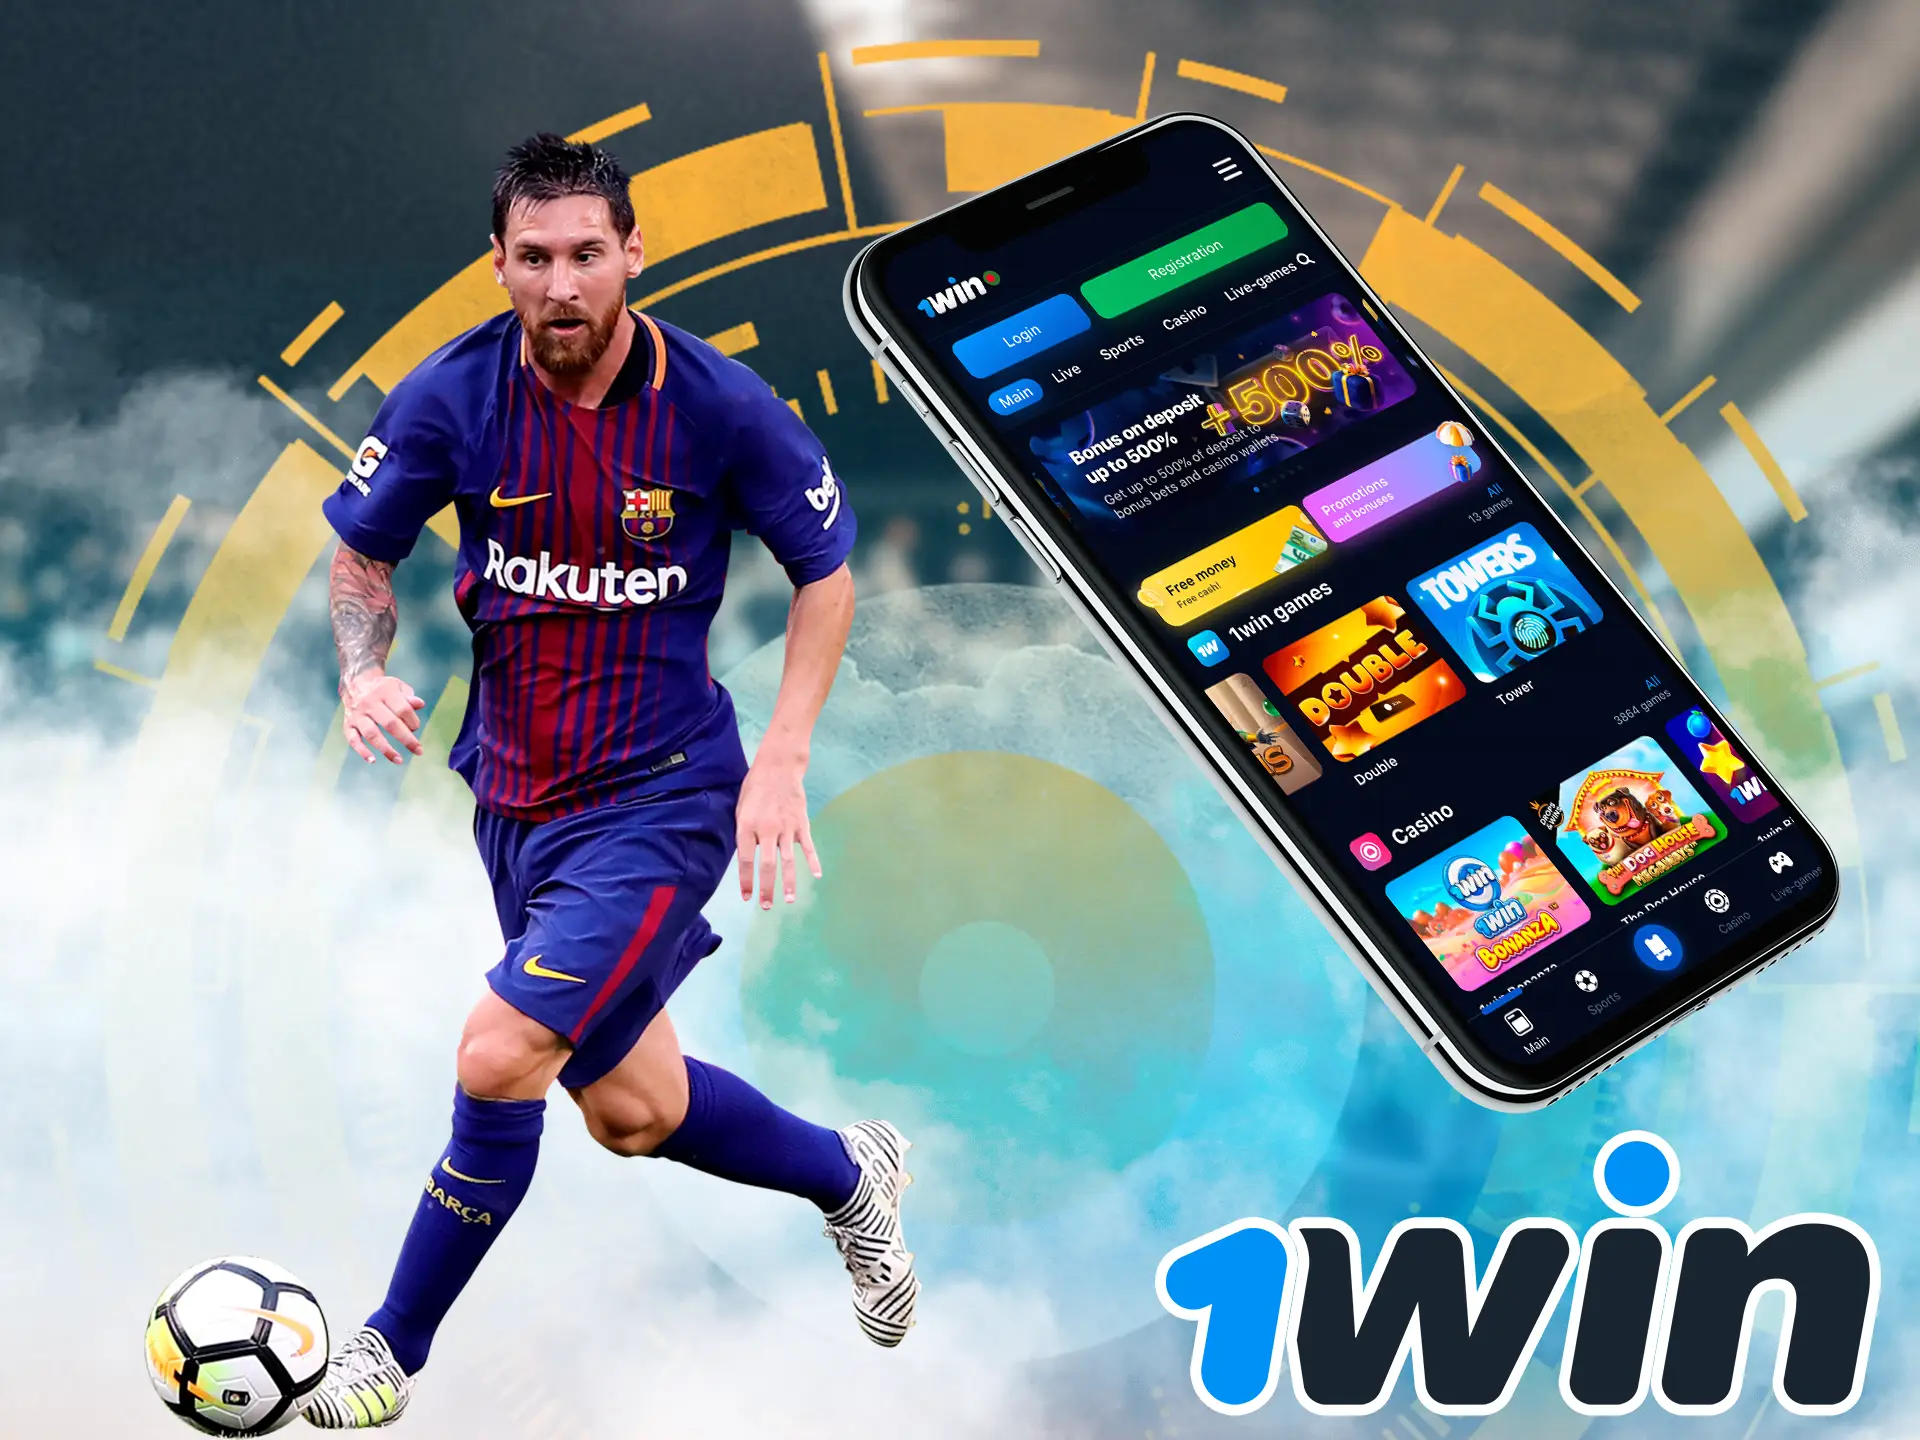 Dive into an abundance of betting types right on your smartphone, anywhere you want, thanks to the platform 1win.